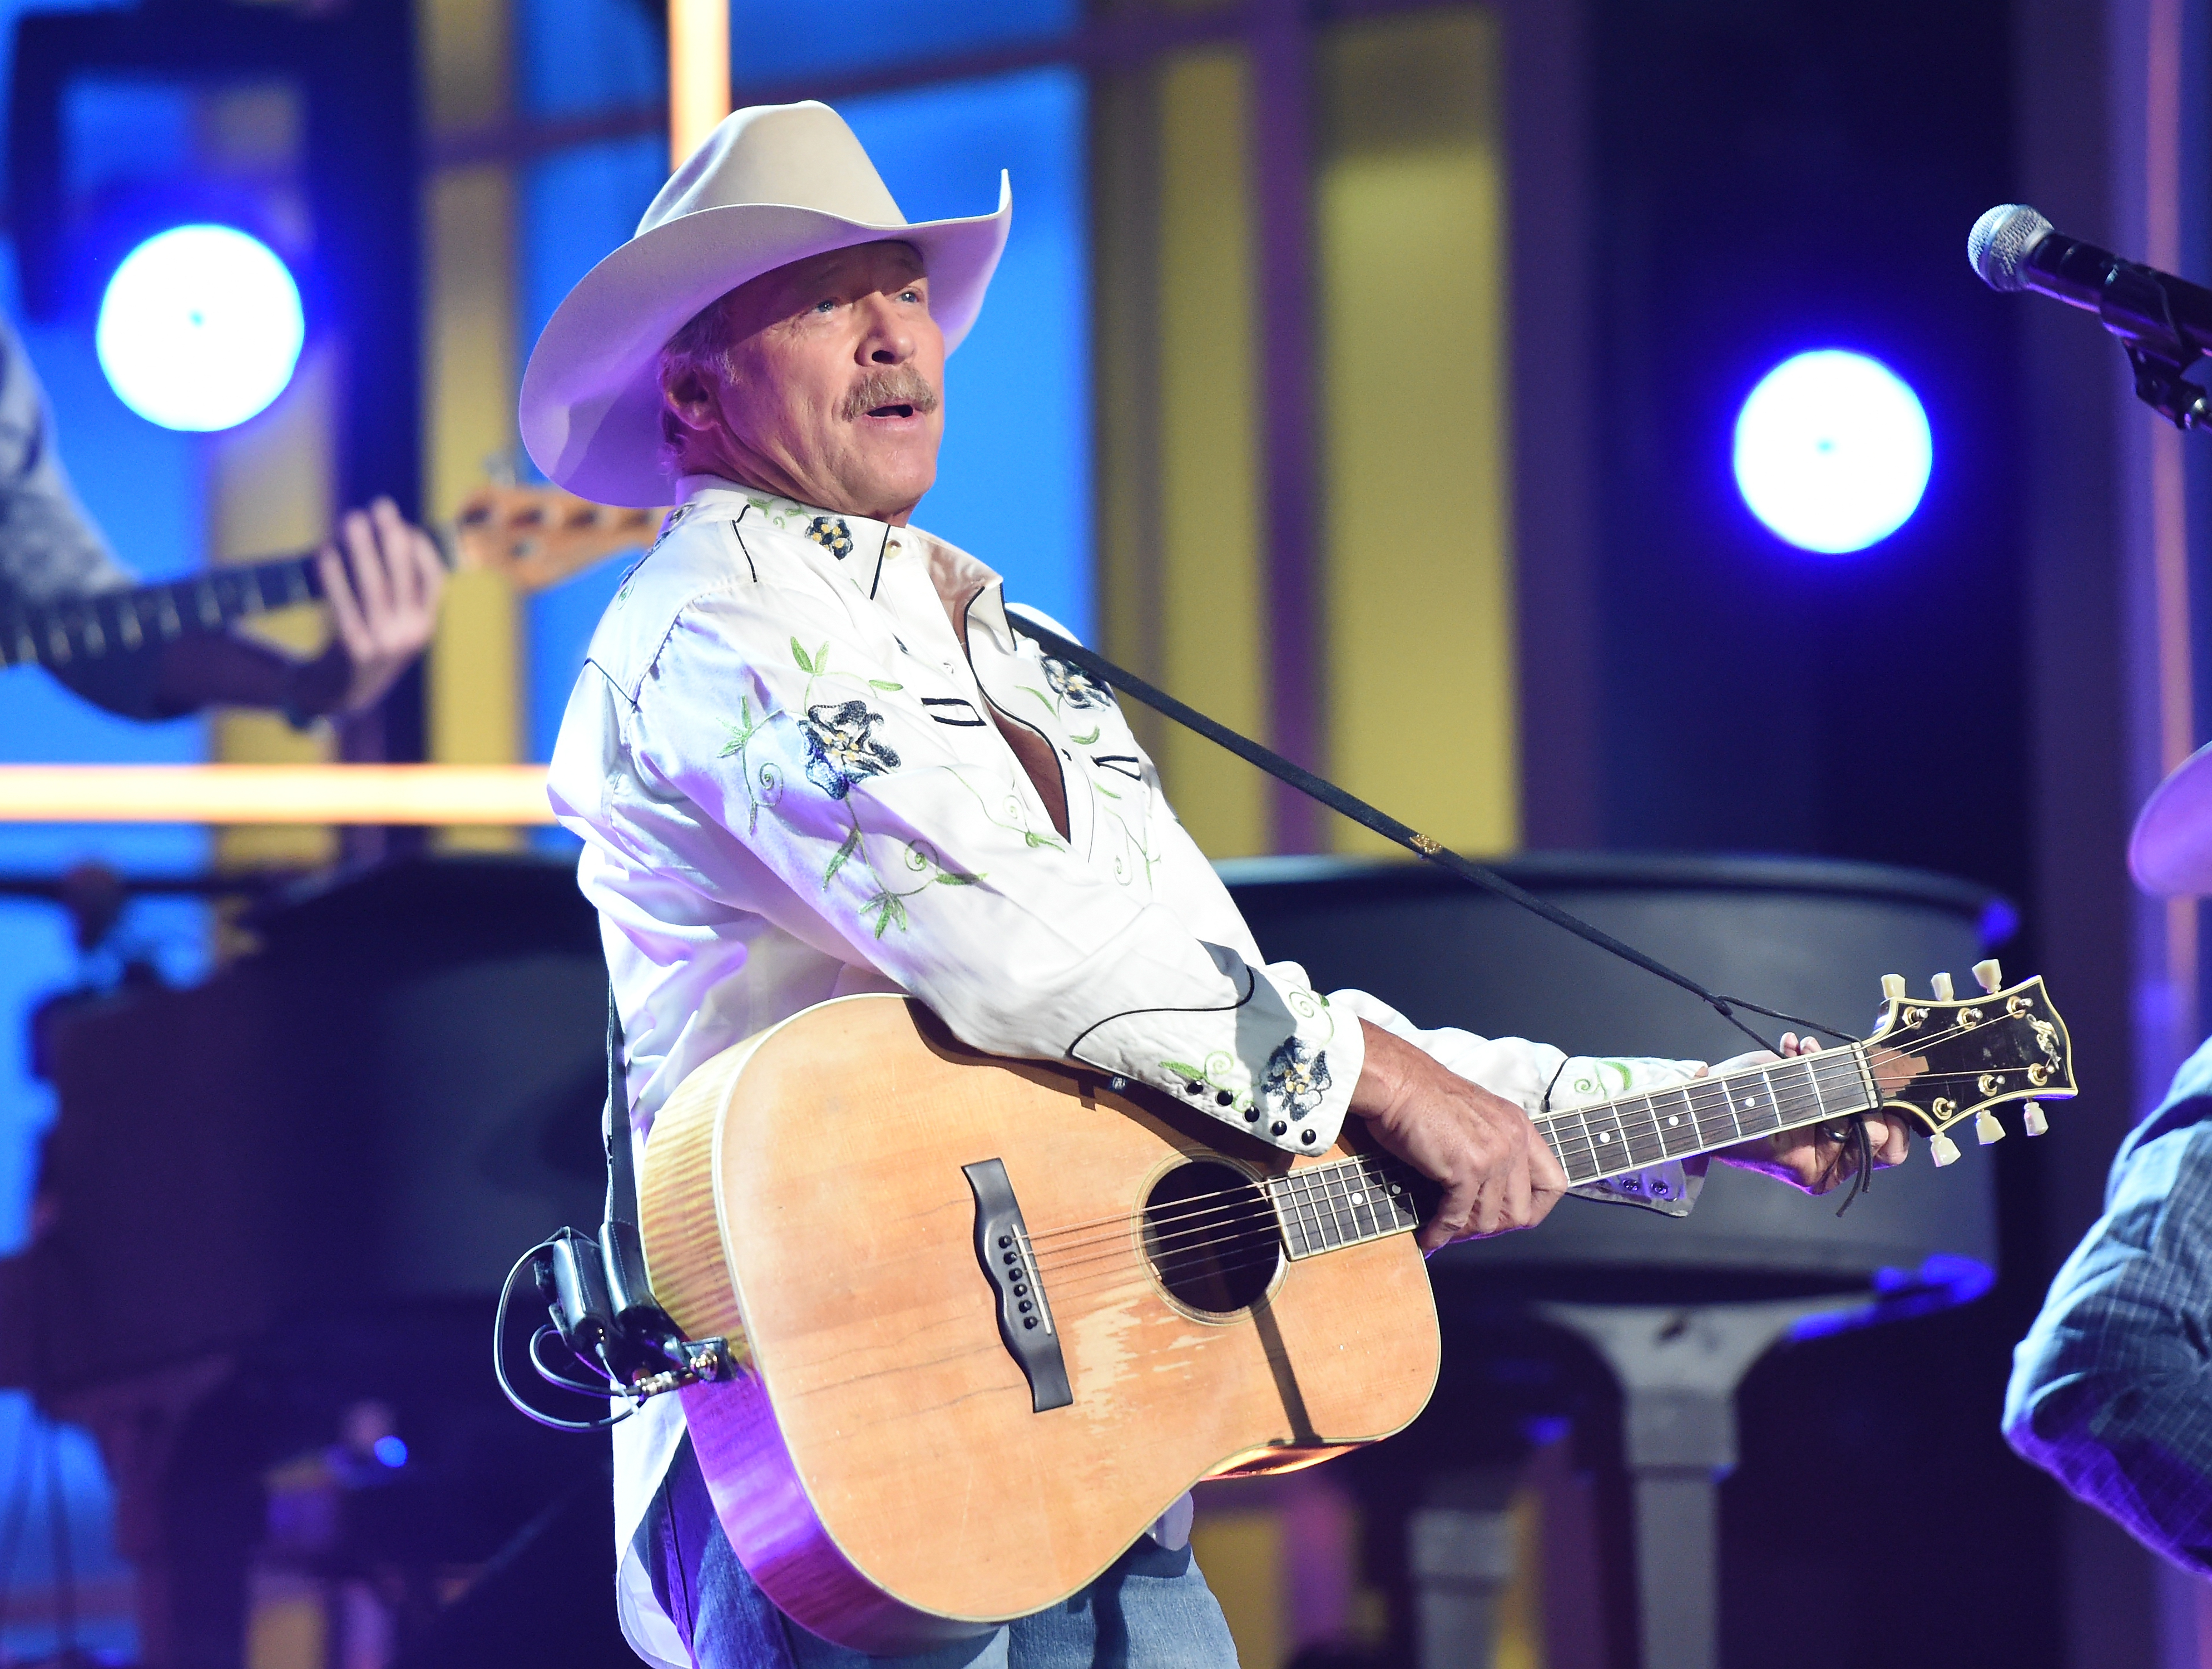 Alan Jackson performs during the 53rd Academy of Country Music Awards at MGM Grand Garden Arena on April 15, 2018 in Las Vegas, Nevada | Source: Getty Images